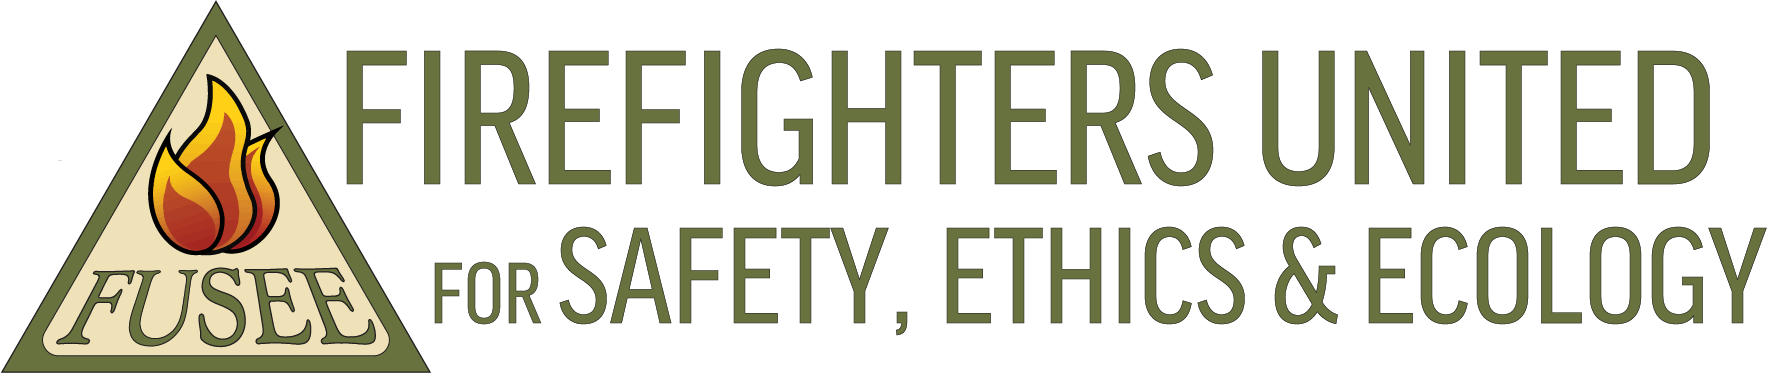 Firefighters United for Safety, Ethics, and Ecology